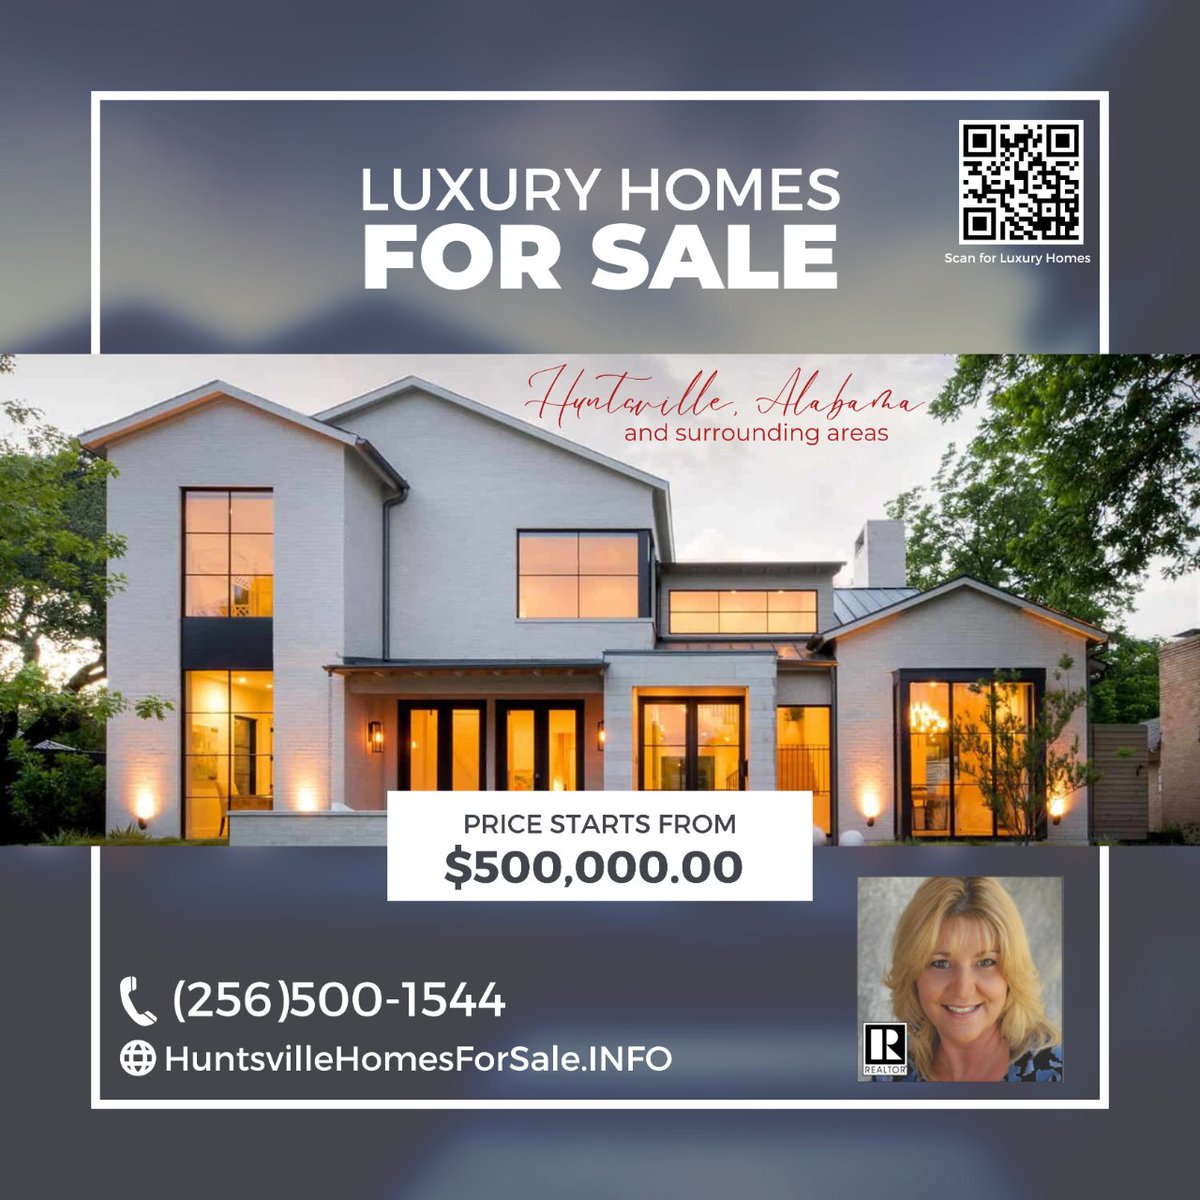 Are you in the market for a Luxury Home? Check out these stunning Luxury Homes for sale in Huntsville Al. 🏡 ❤️ i.mtr.cool/shmayerzak #huntsville #huntsvillealabama #huntsvilleluxuryhomes #huntsvillehomesforsale #rebekahroserealtor #remaxunlimited #dreamhome #huntsvilleluxury